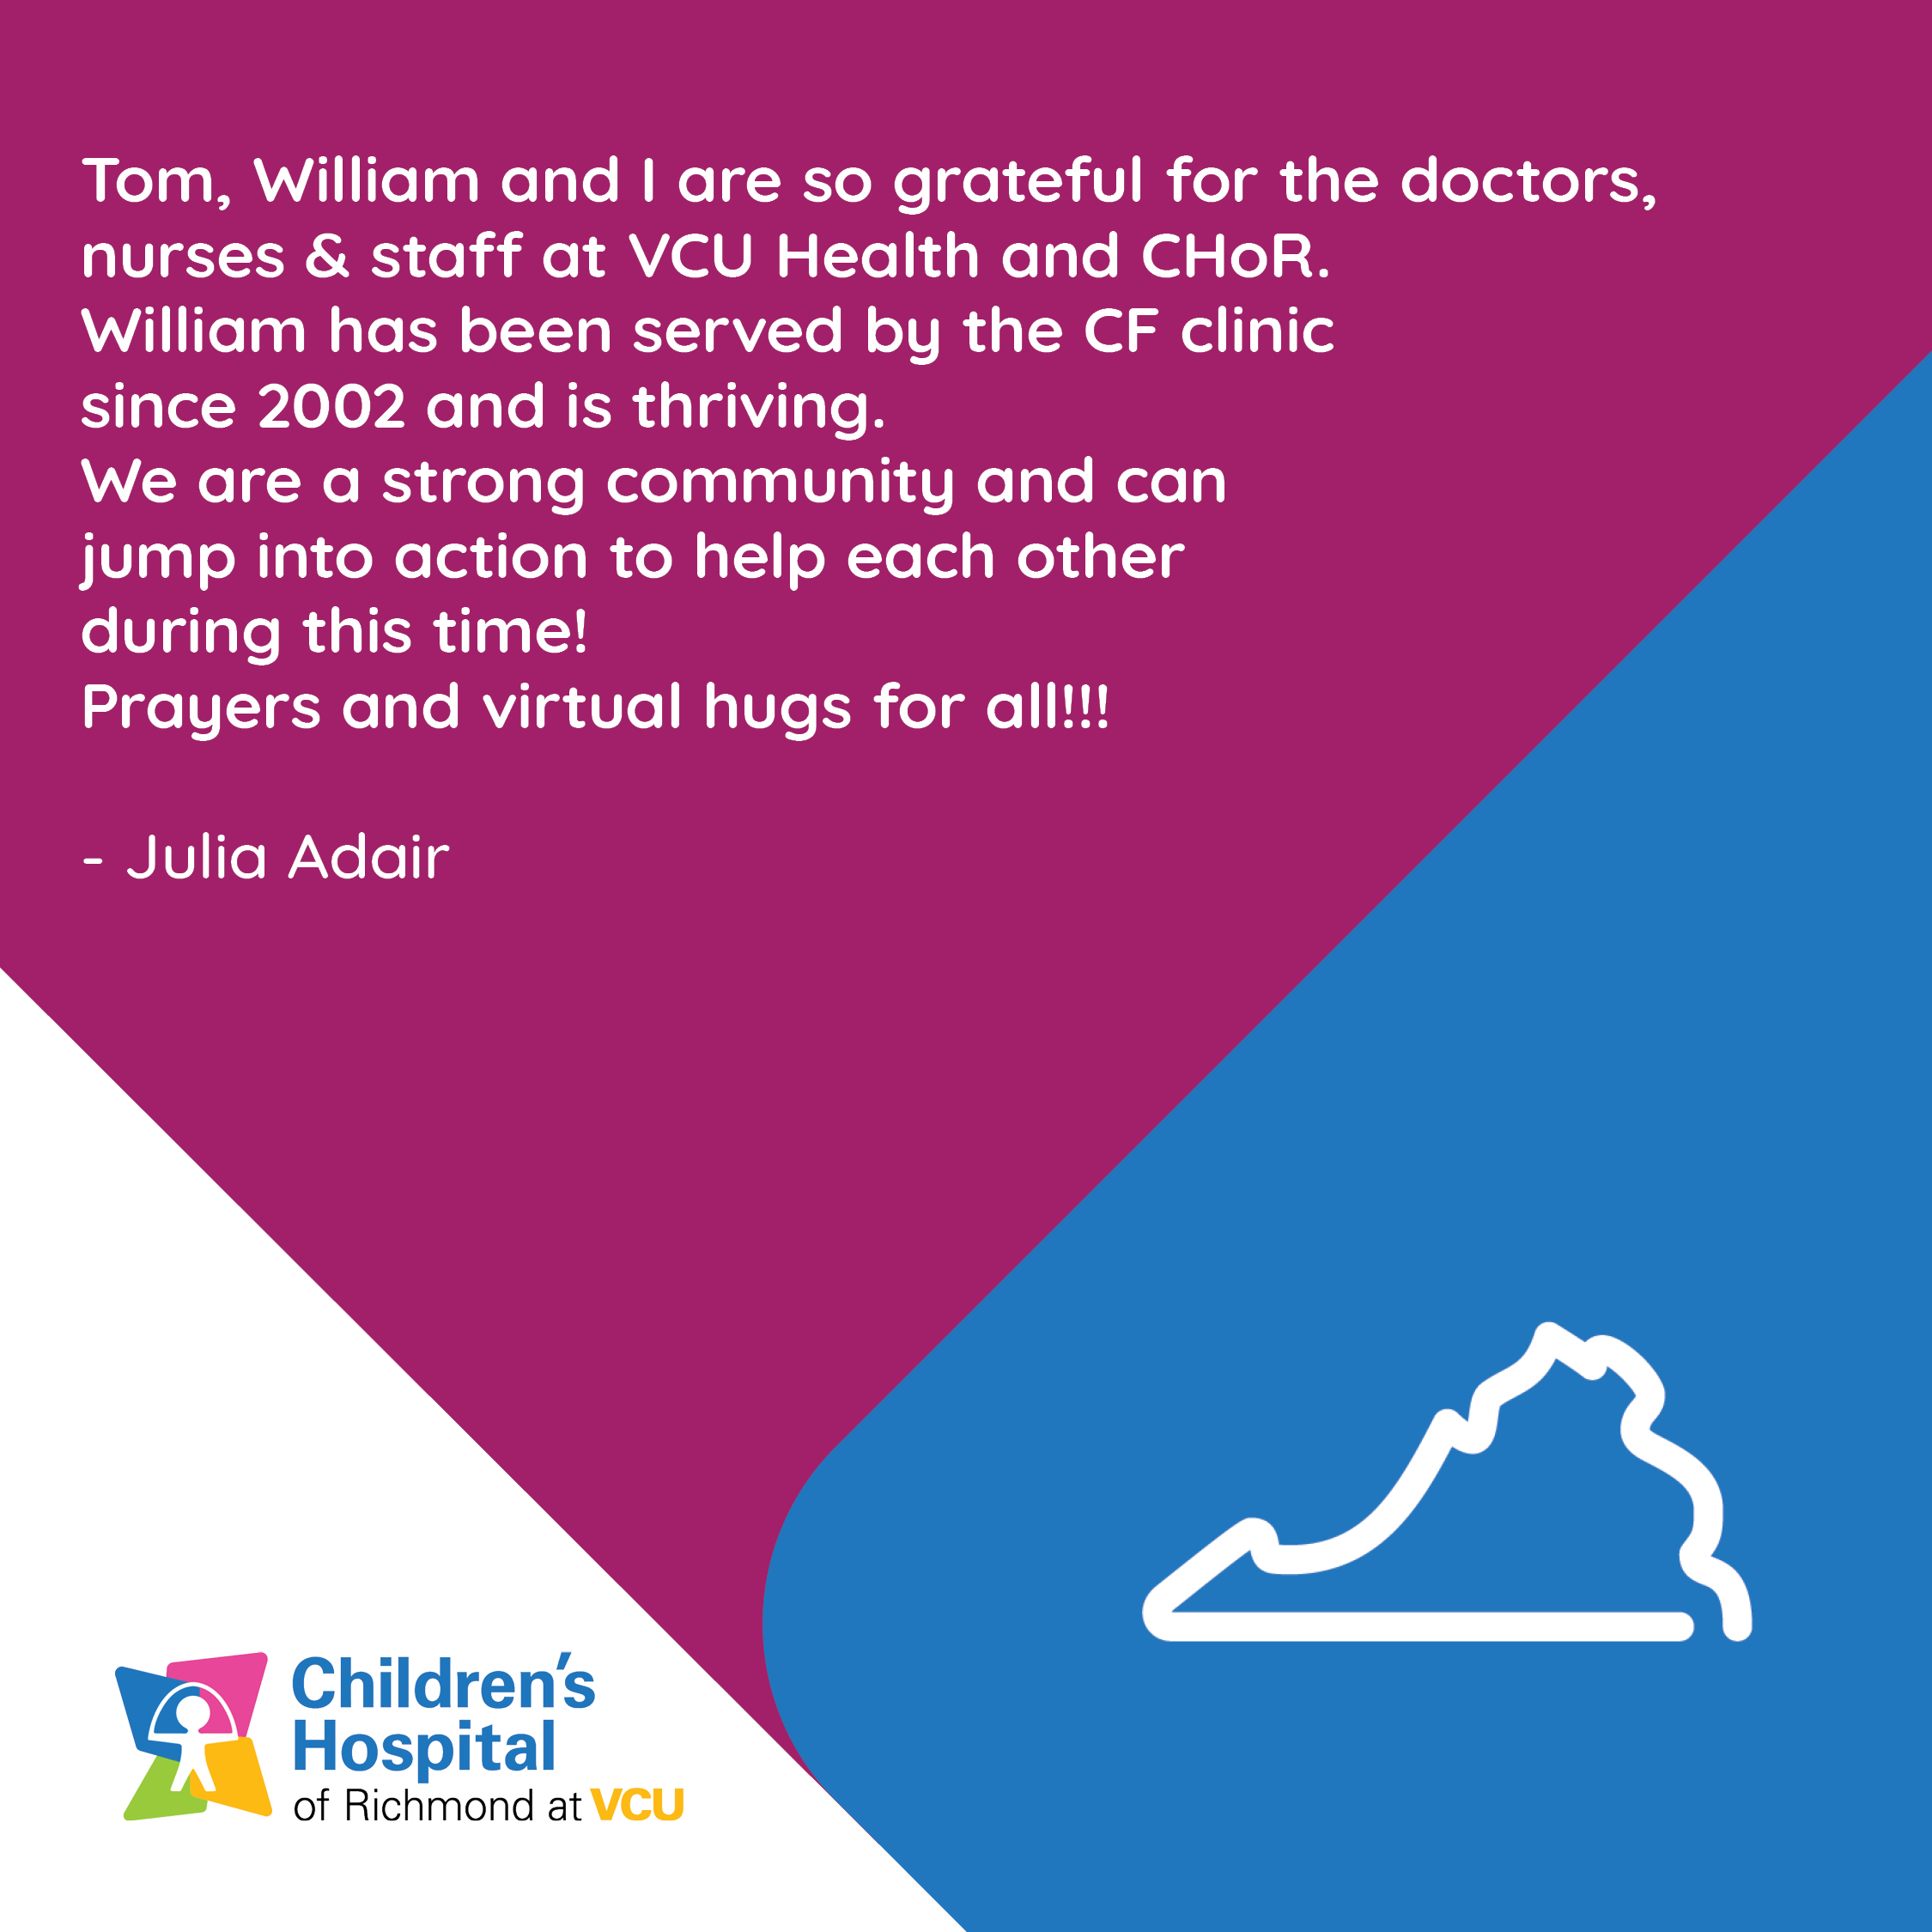 Tom, William and I are so grateful for the doctors at CHoR!